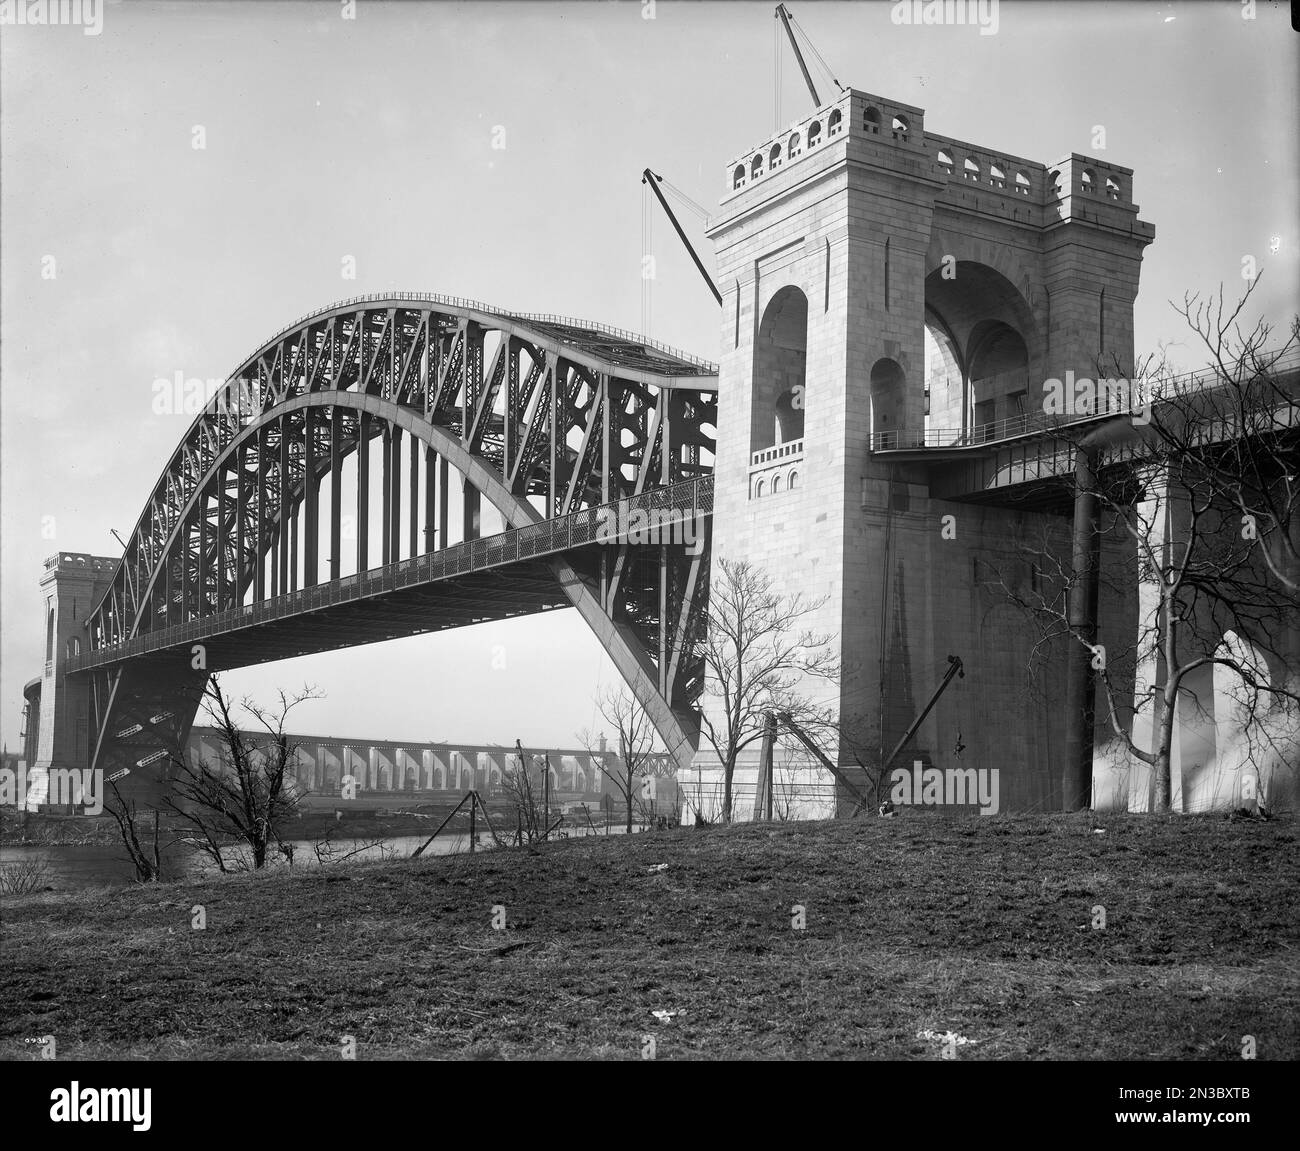 Historic view of The Hell Gate Bridge, originally the New York Connecting Railroad Bridge or the East River Arch Bridge, a steel through arch railroad bridge in New York City, America Stock Photo